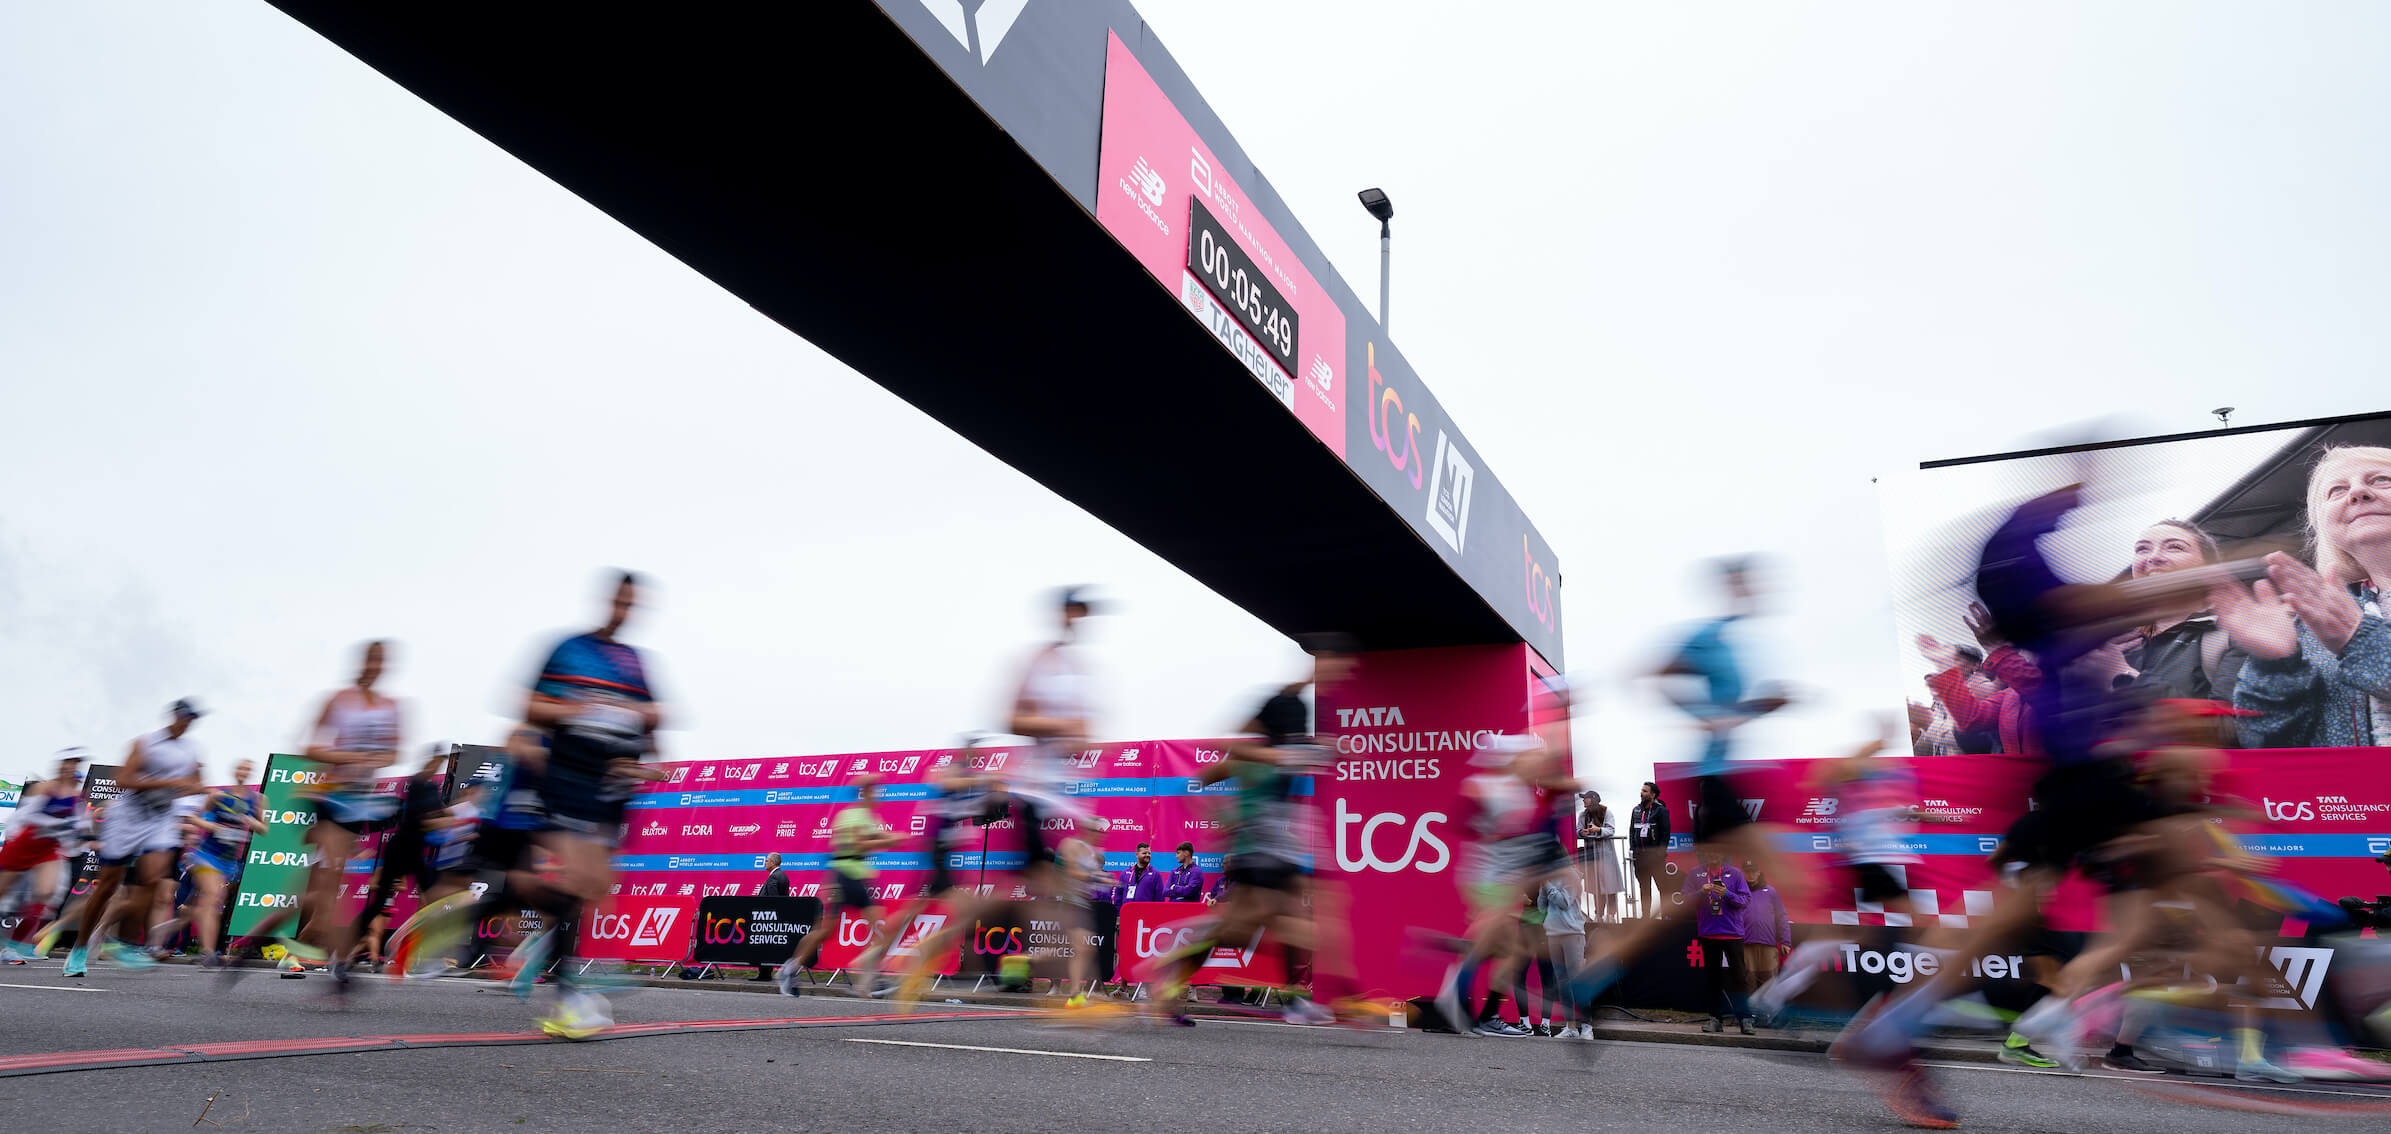 A blur of participants crossing the Start Line